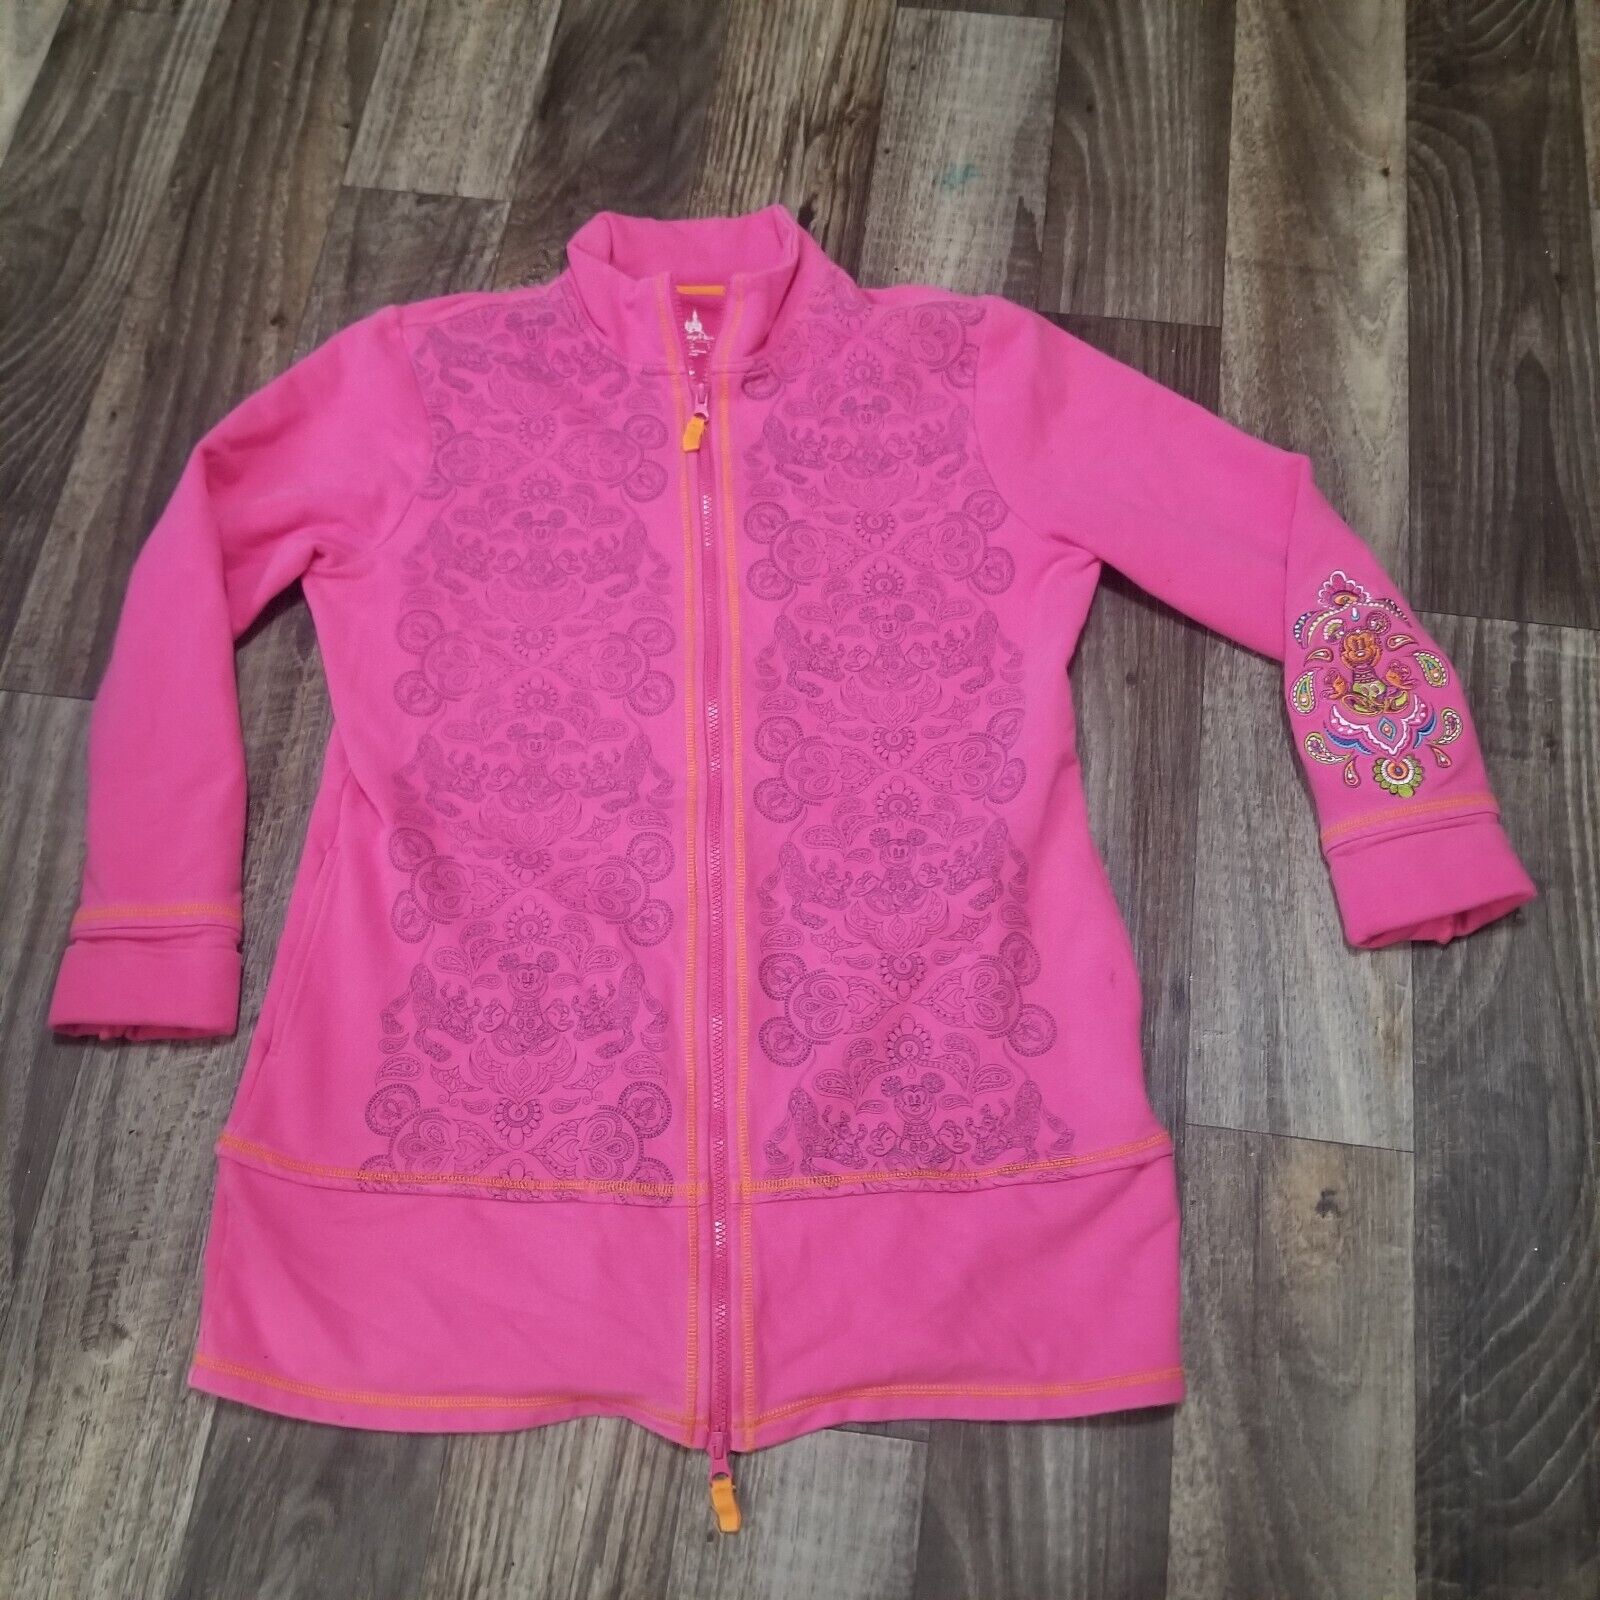 Vintage Disney Parks Embroidered Mickey Mouse Pink Jacket Women's Large